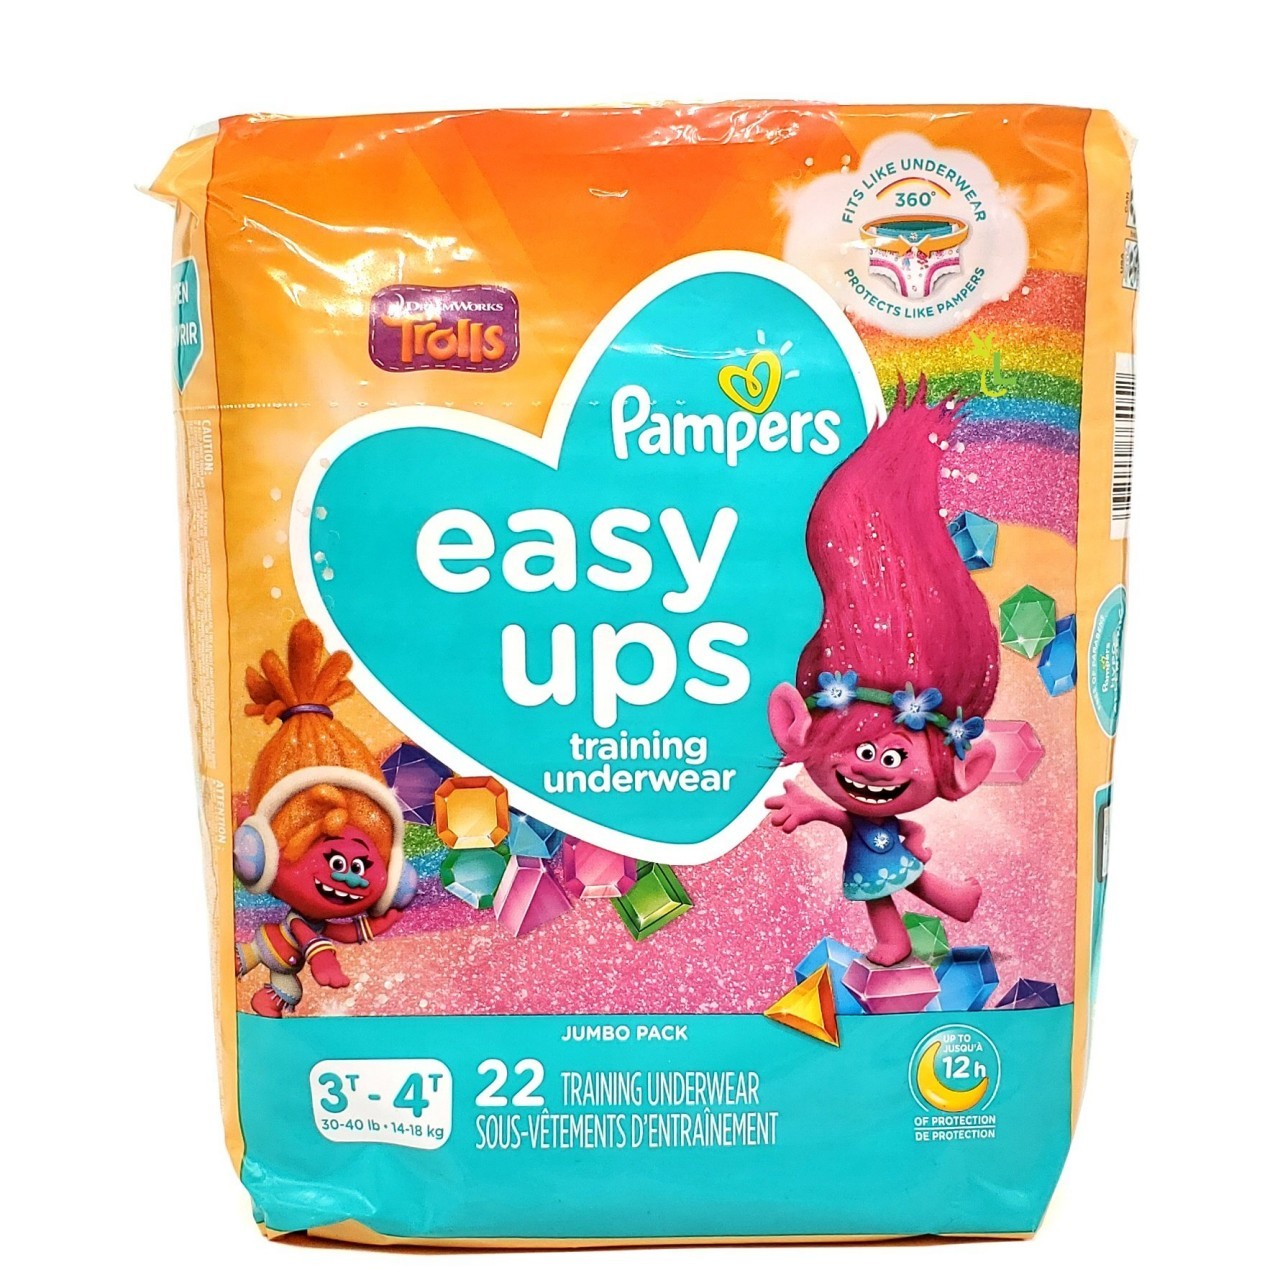 PAMPERS EASY UPS GIRLS 3T-4T 22s